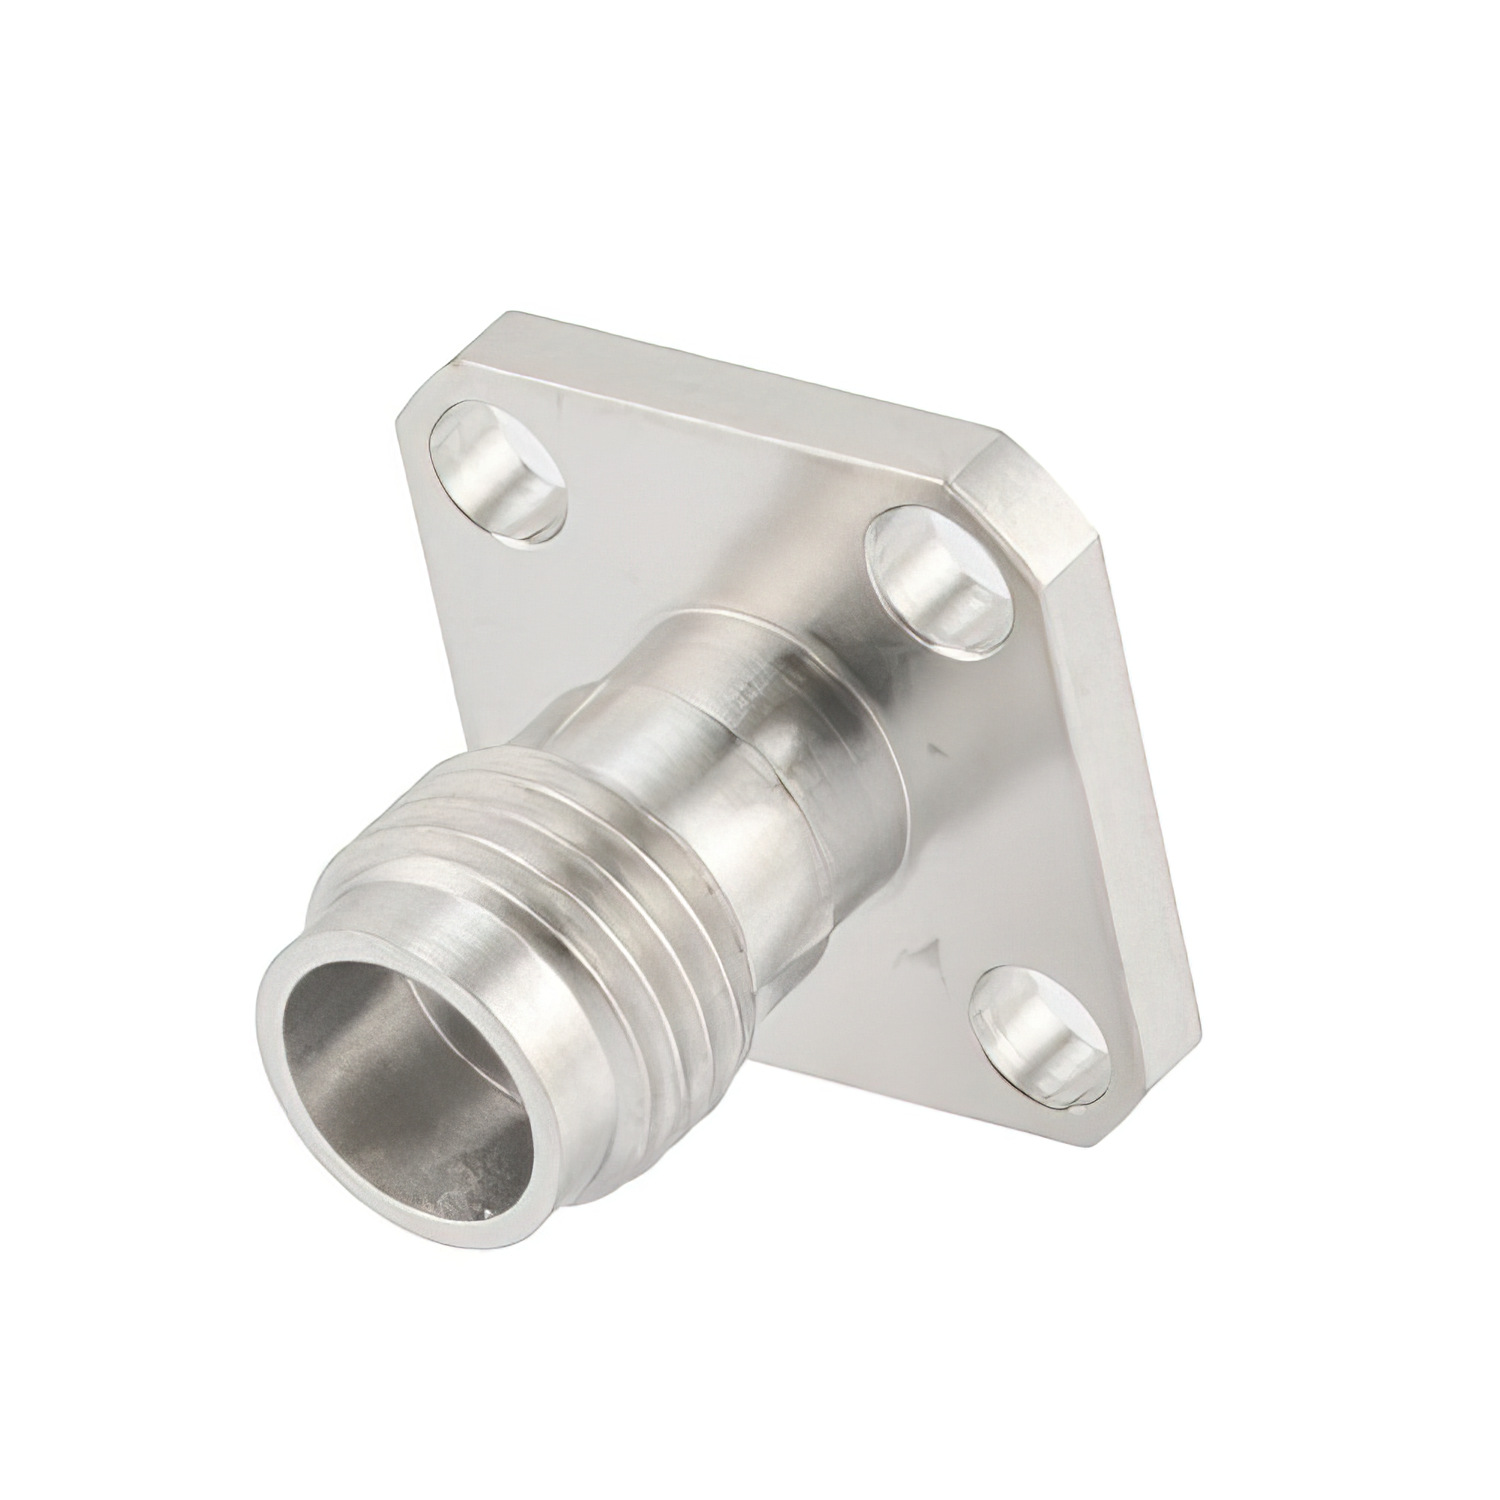 1.85mm Female Field Replaceable Connector 4 Hole Flange Mount3